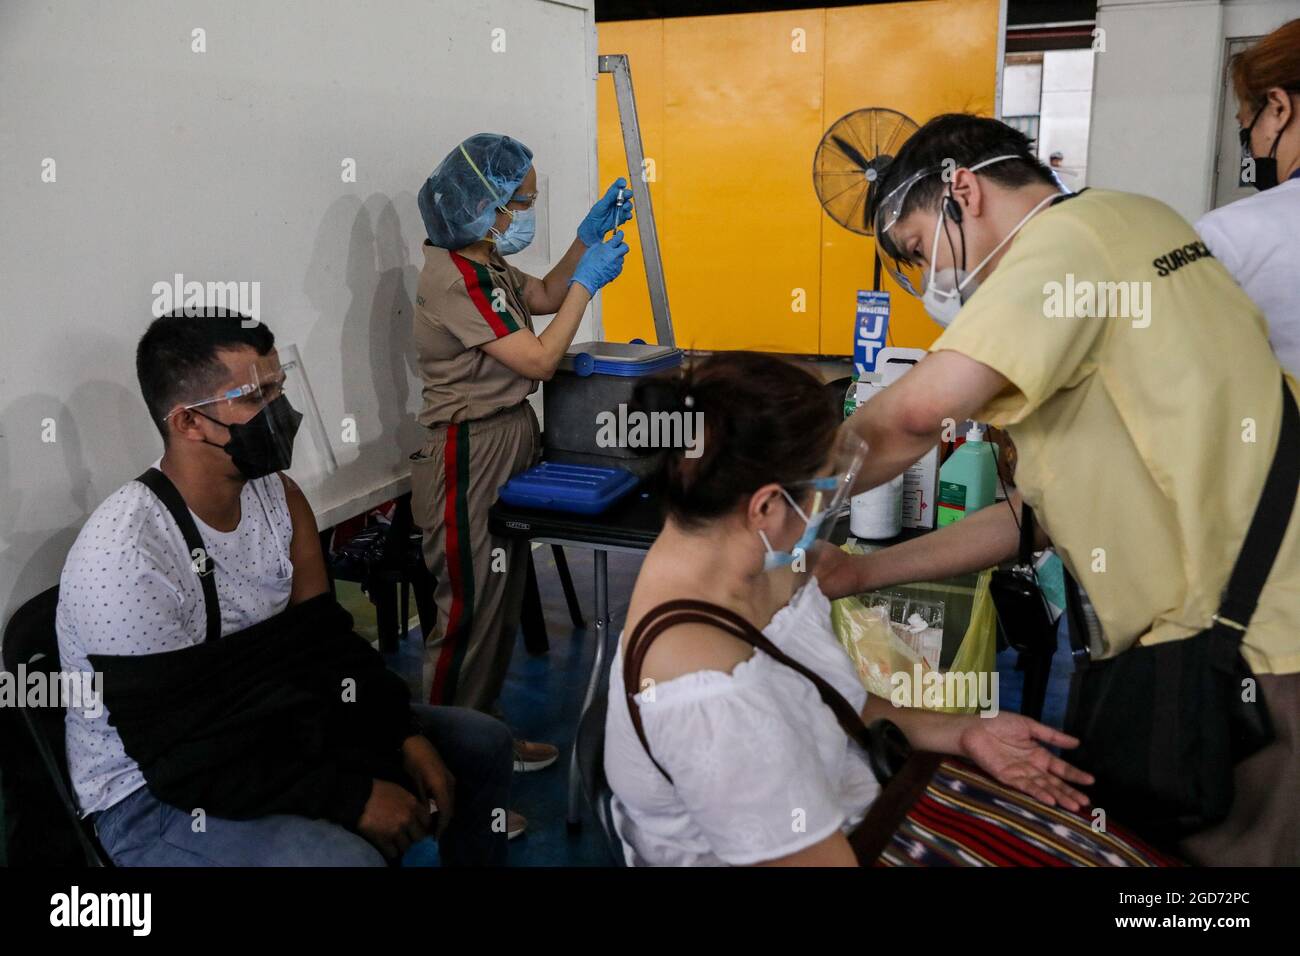 Medical workers inoculate patients with the AstraZeneca COVID-19 vaccine at the University of Santo Tomas. The university opened its vaccination site where about 1,000 doses of the AstraZeneca vaccine were administered by medical clerks and government health workers. Manila, Philippines. Stock Photo